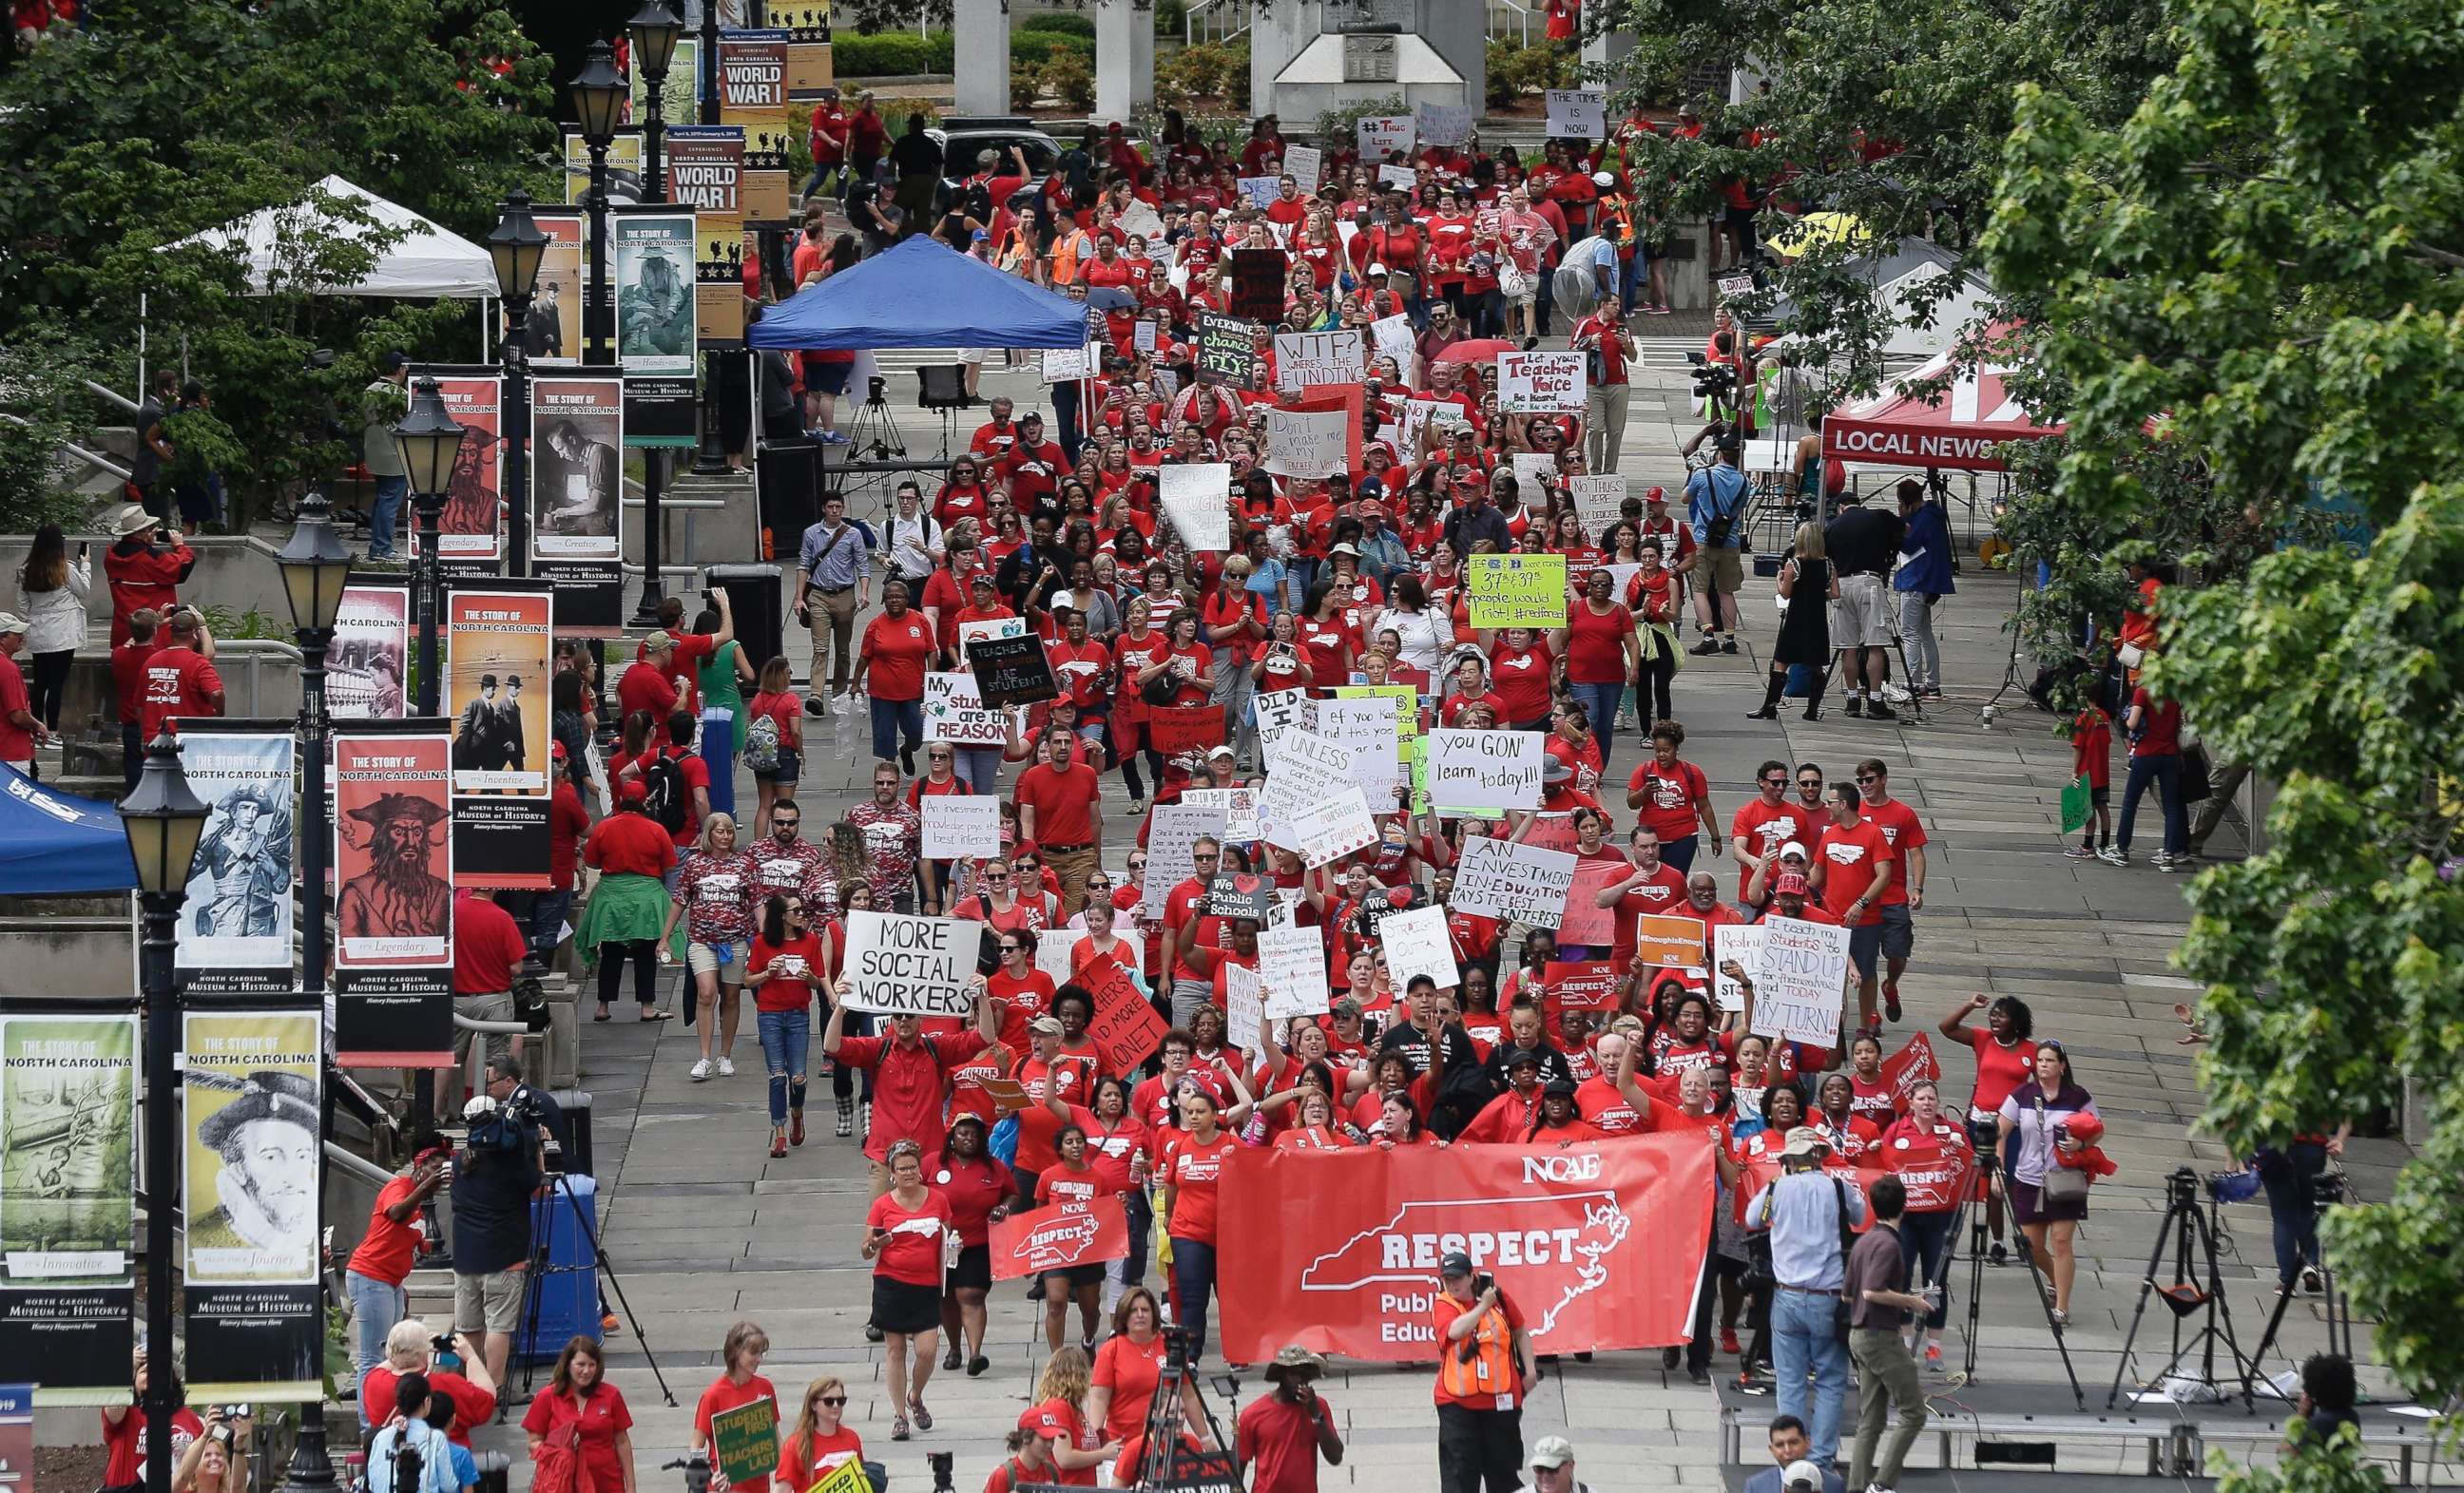 PHOTO: Participants make their way towards the Legislative Building during a teachers rally at the General Assembly in Raleigh, N.C., on May 16, 2018.